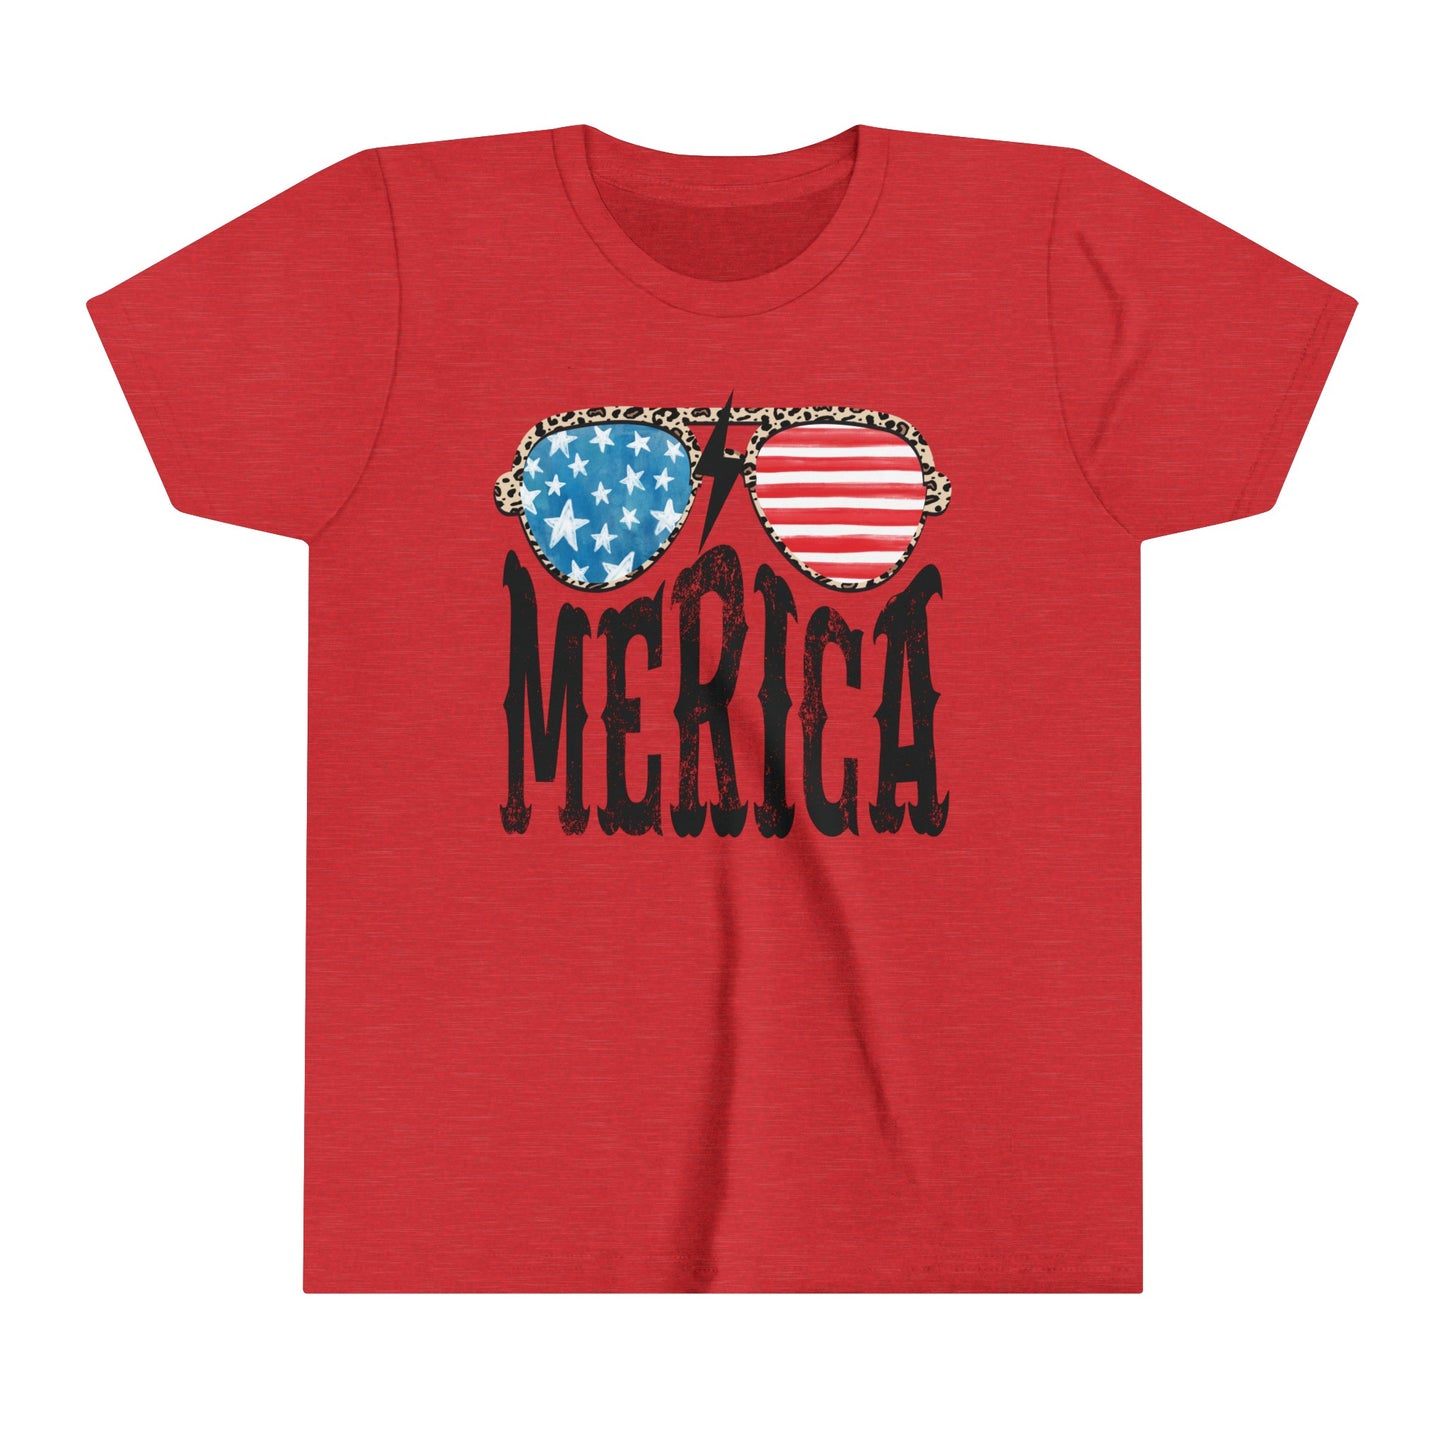 Merica 4th of July USA Youth Shirt